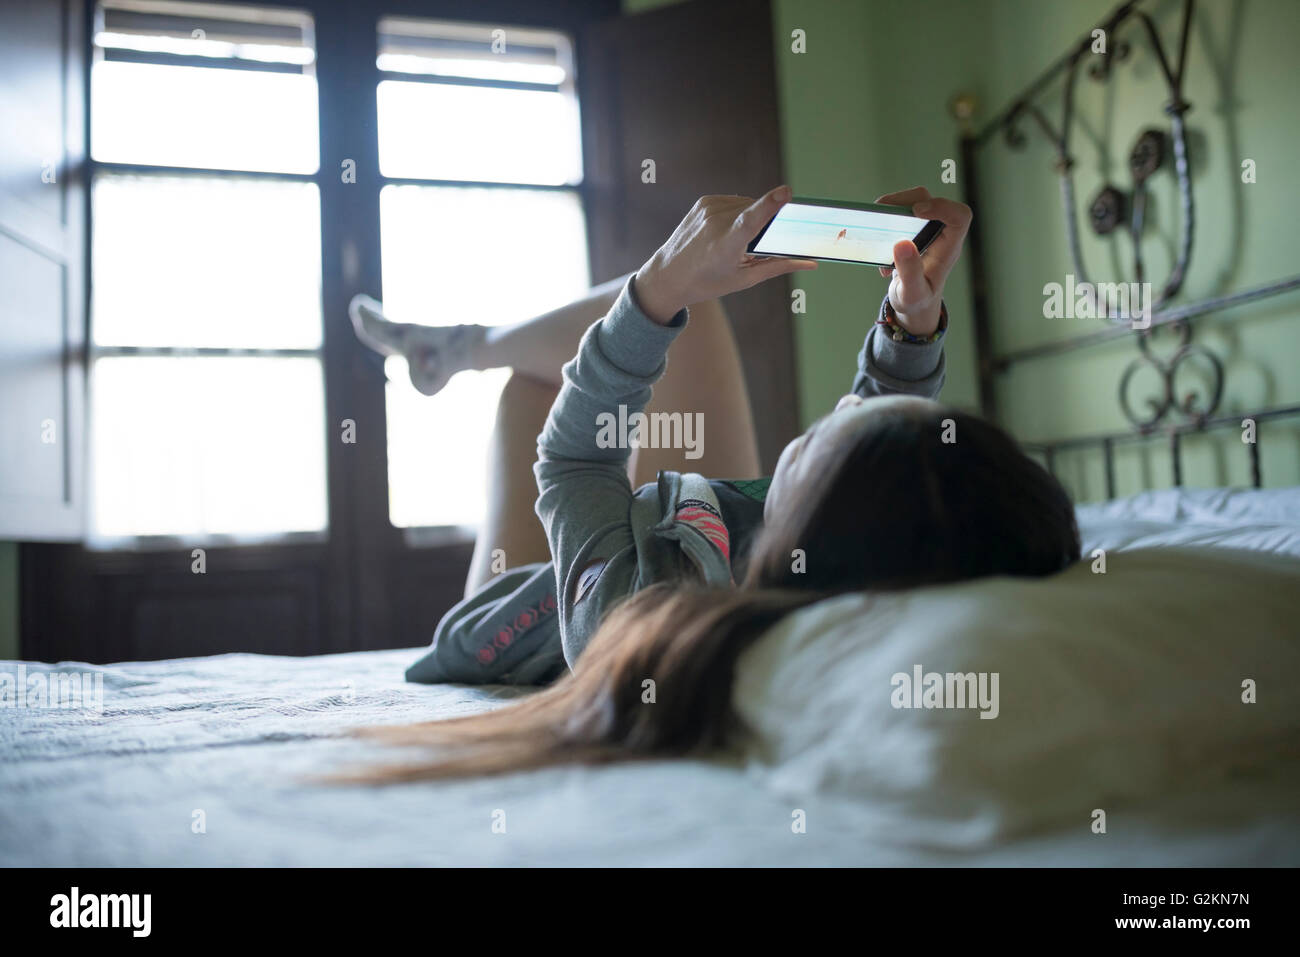 Woman Lying in Bed using smartphone Banque D'Images